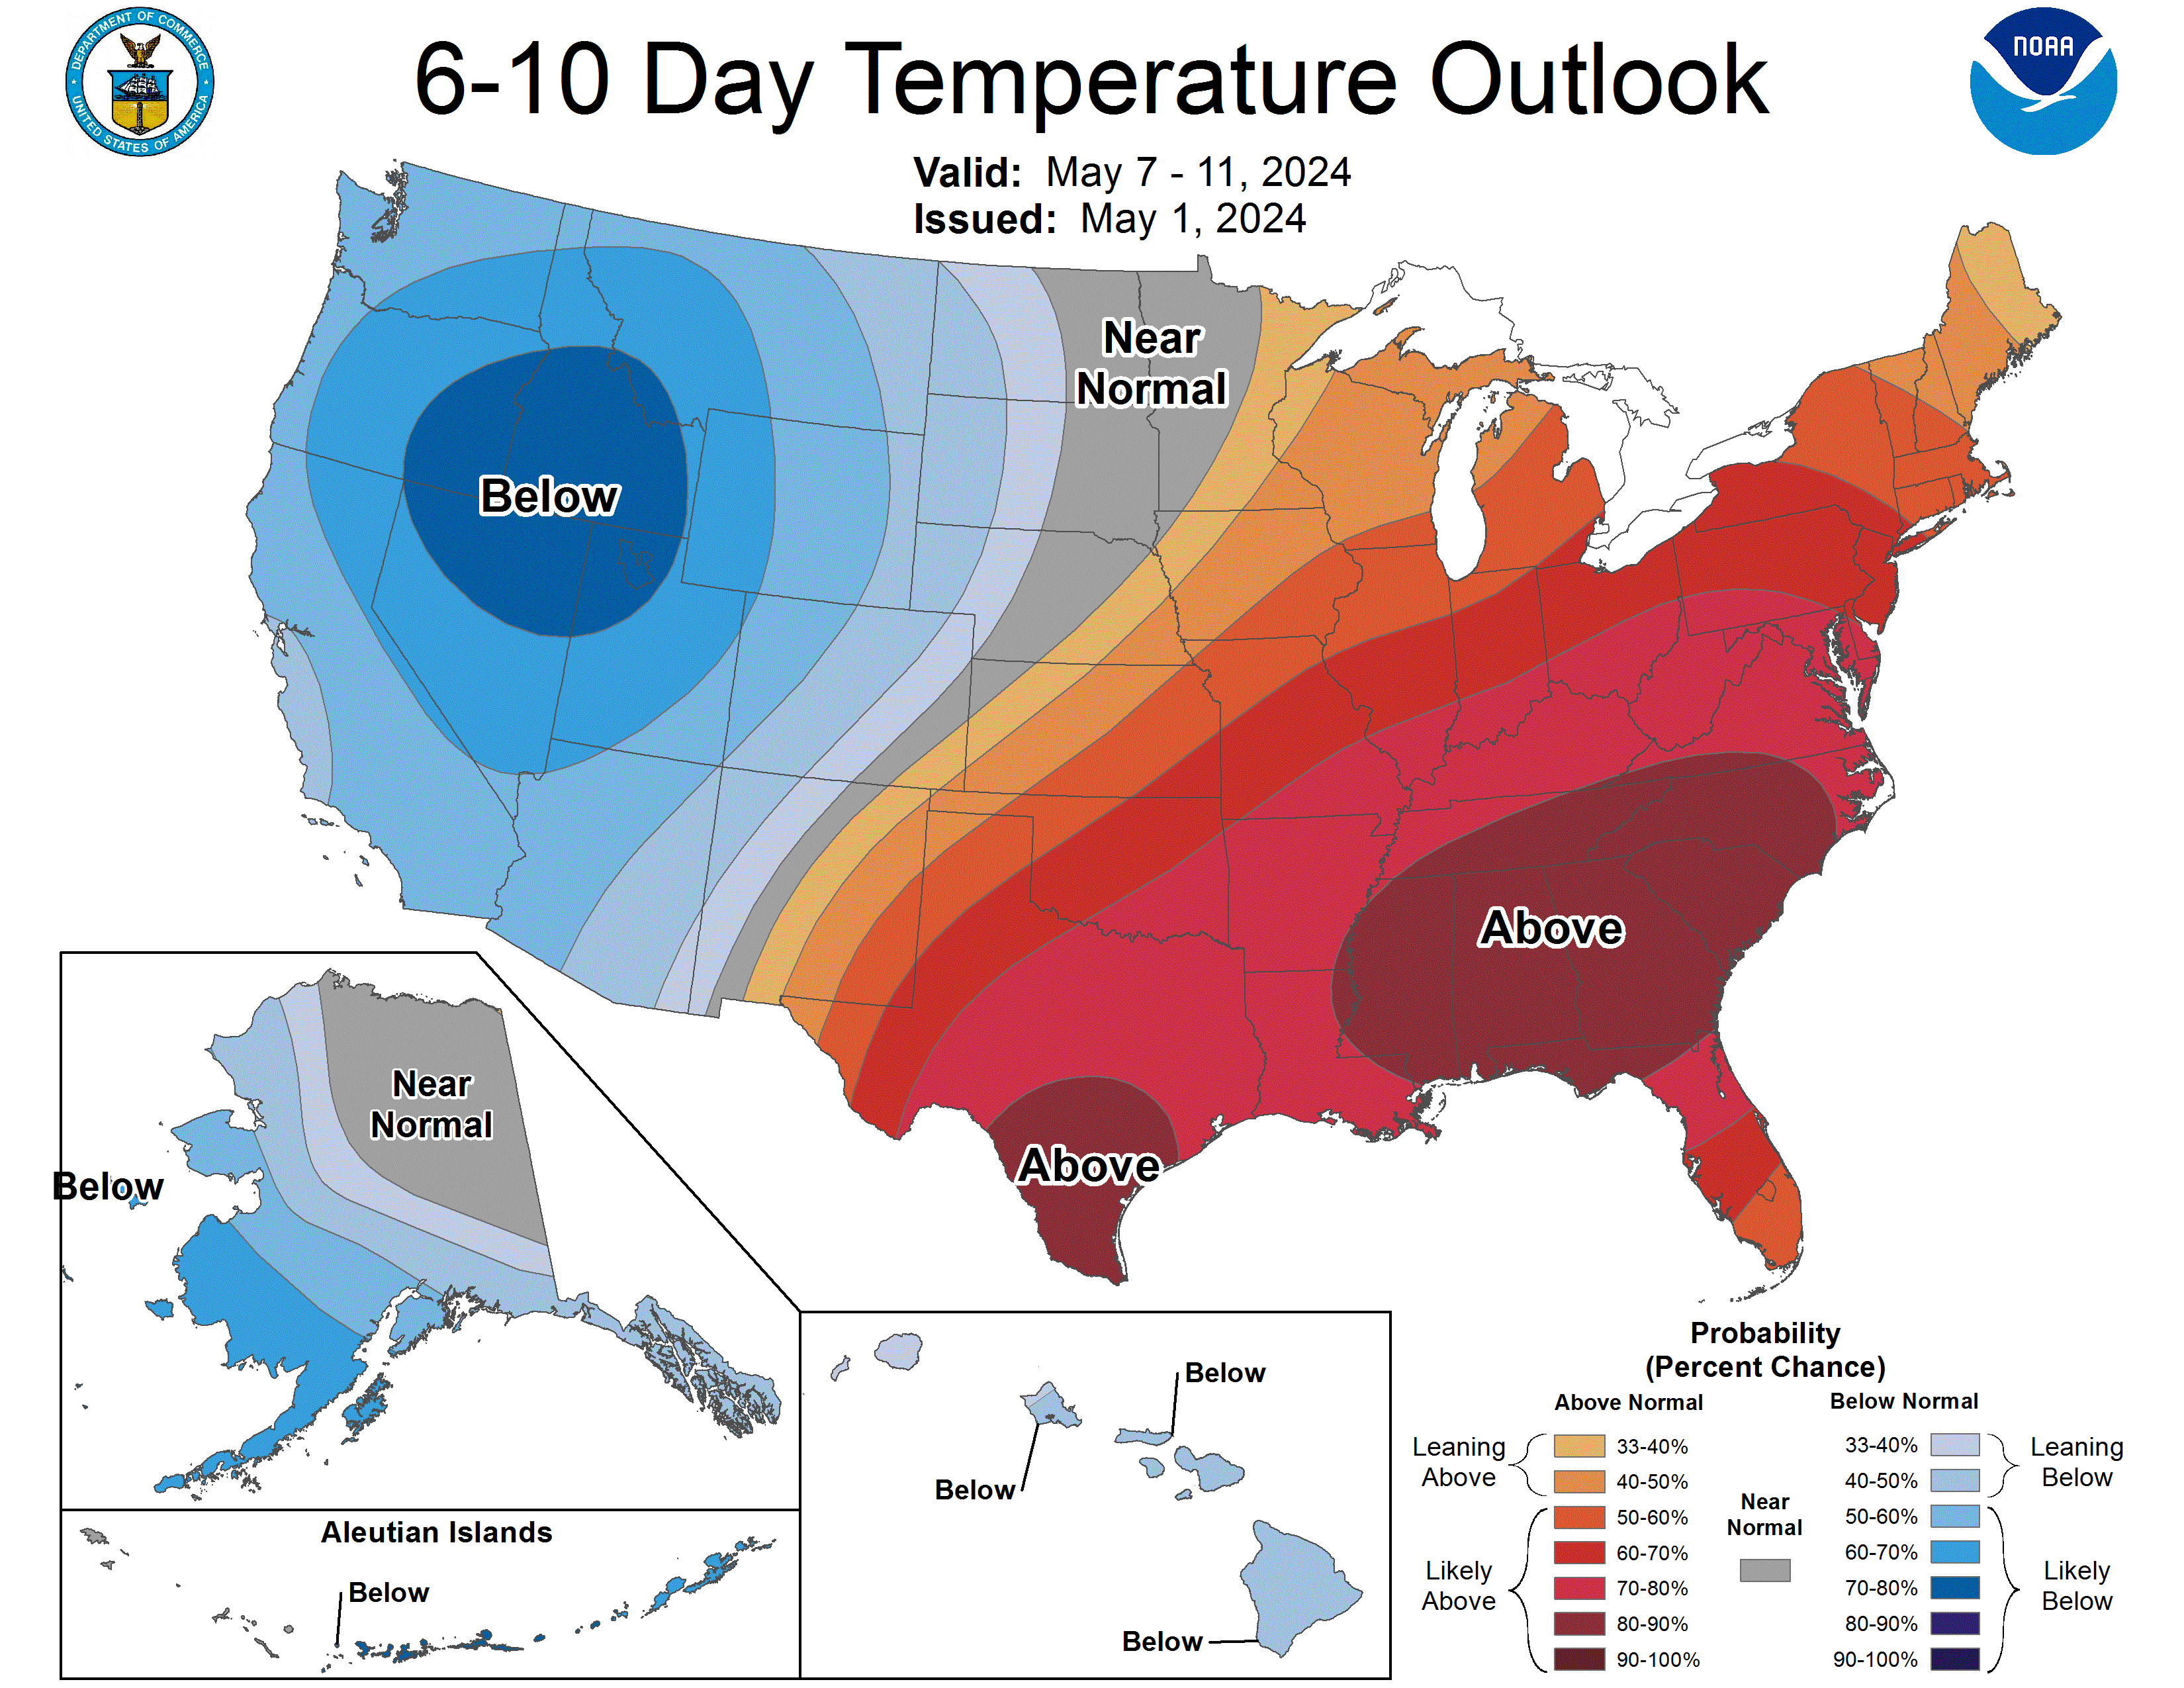 6-10 Day temps